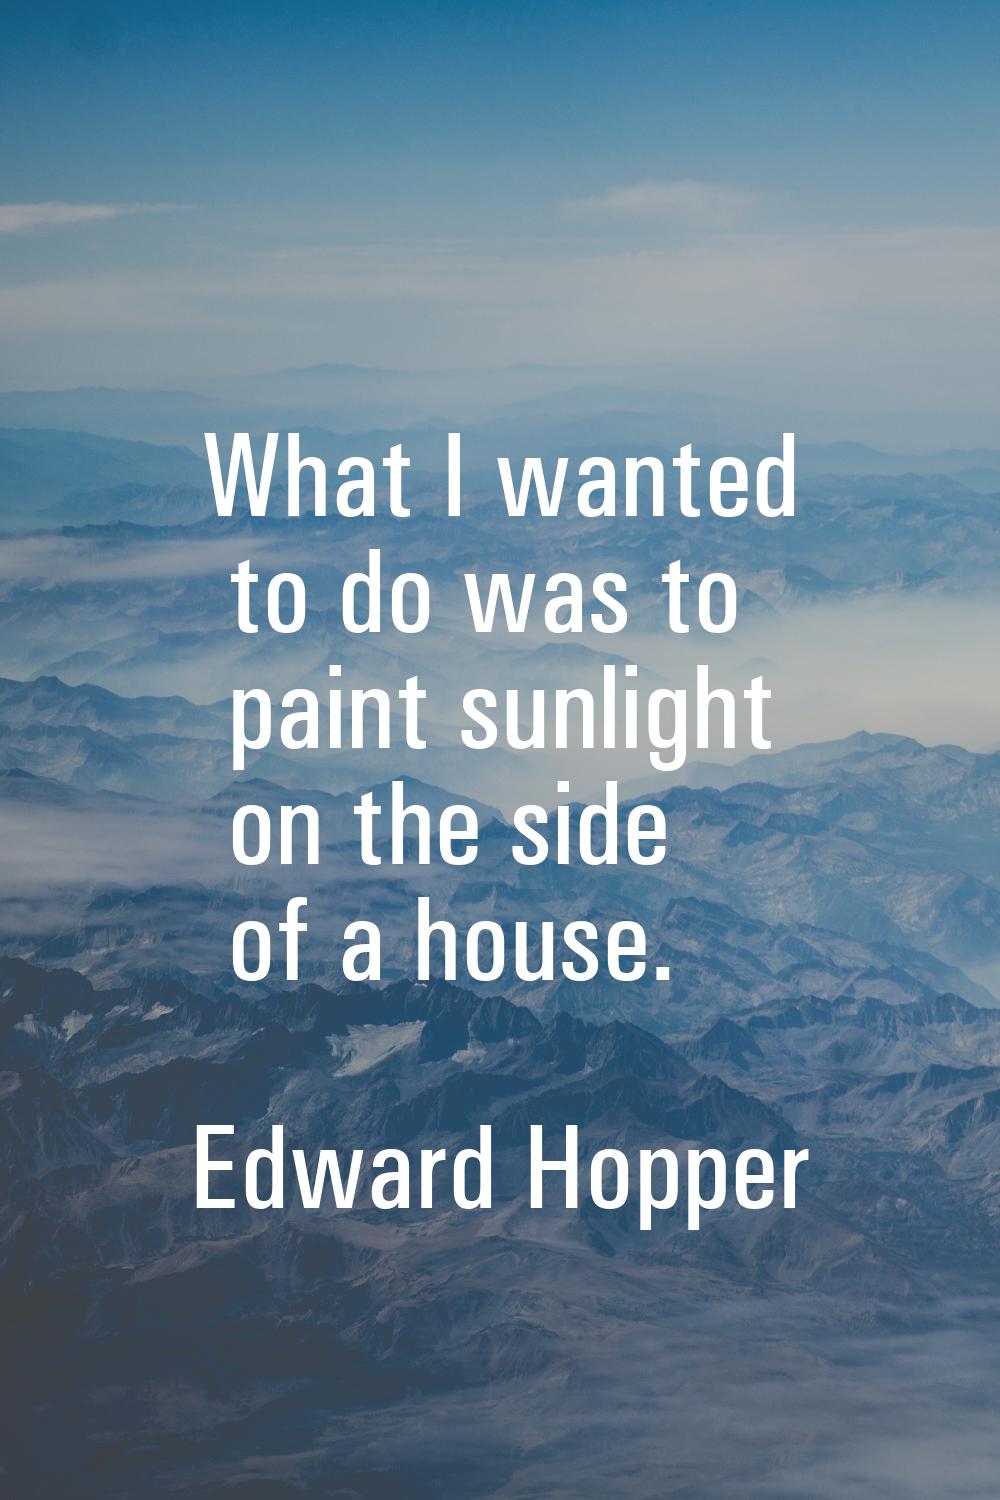 What I wanted to do was to paint sunlight on the side of a house.